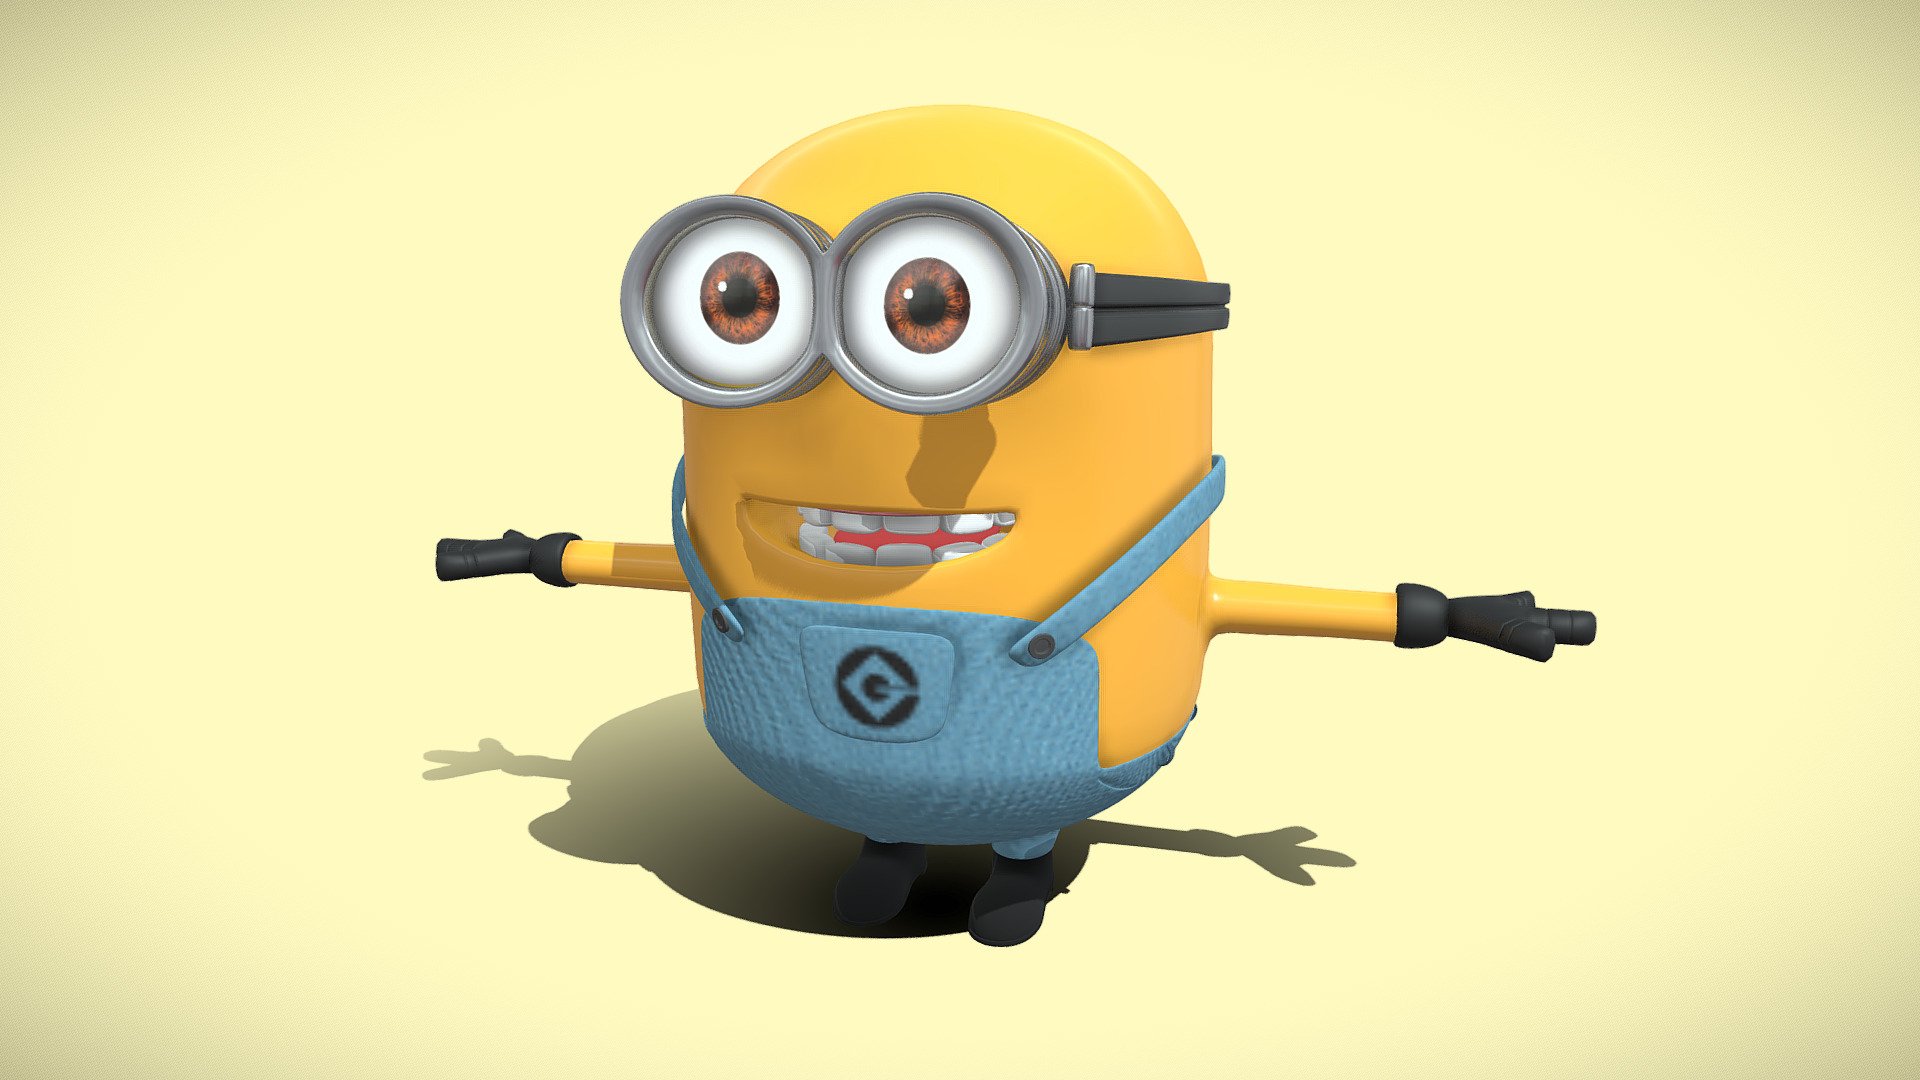 his high-quality 3D model represents the Minions, beloved animated characters known for their mischievous antics and charming personalities. The model accurately captures the iconic look and features of the Minions.

The Minions are small, yellow creatures with cylindrical bodies, wearing distinctive blue overalls. Their playful expressions and goggles are faithfully depicted in the model, showcasing their unique charm and appeal.

The model showcases the Minions in various poses and interactions, highlighting their camaraderie and humor.

Whether you need it for entertainment, animations, or any other creative project, this 3D model of the Minions will help you accurately visualize and showcase the characters’ charm in a virtual environment.

Note: Please remember to respect intellectual property rights and ensure you have the necessary permissions to use and distribute any 3D models or designs based on copyrighted characters like the Minions 3d model